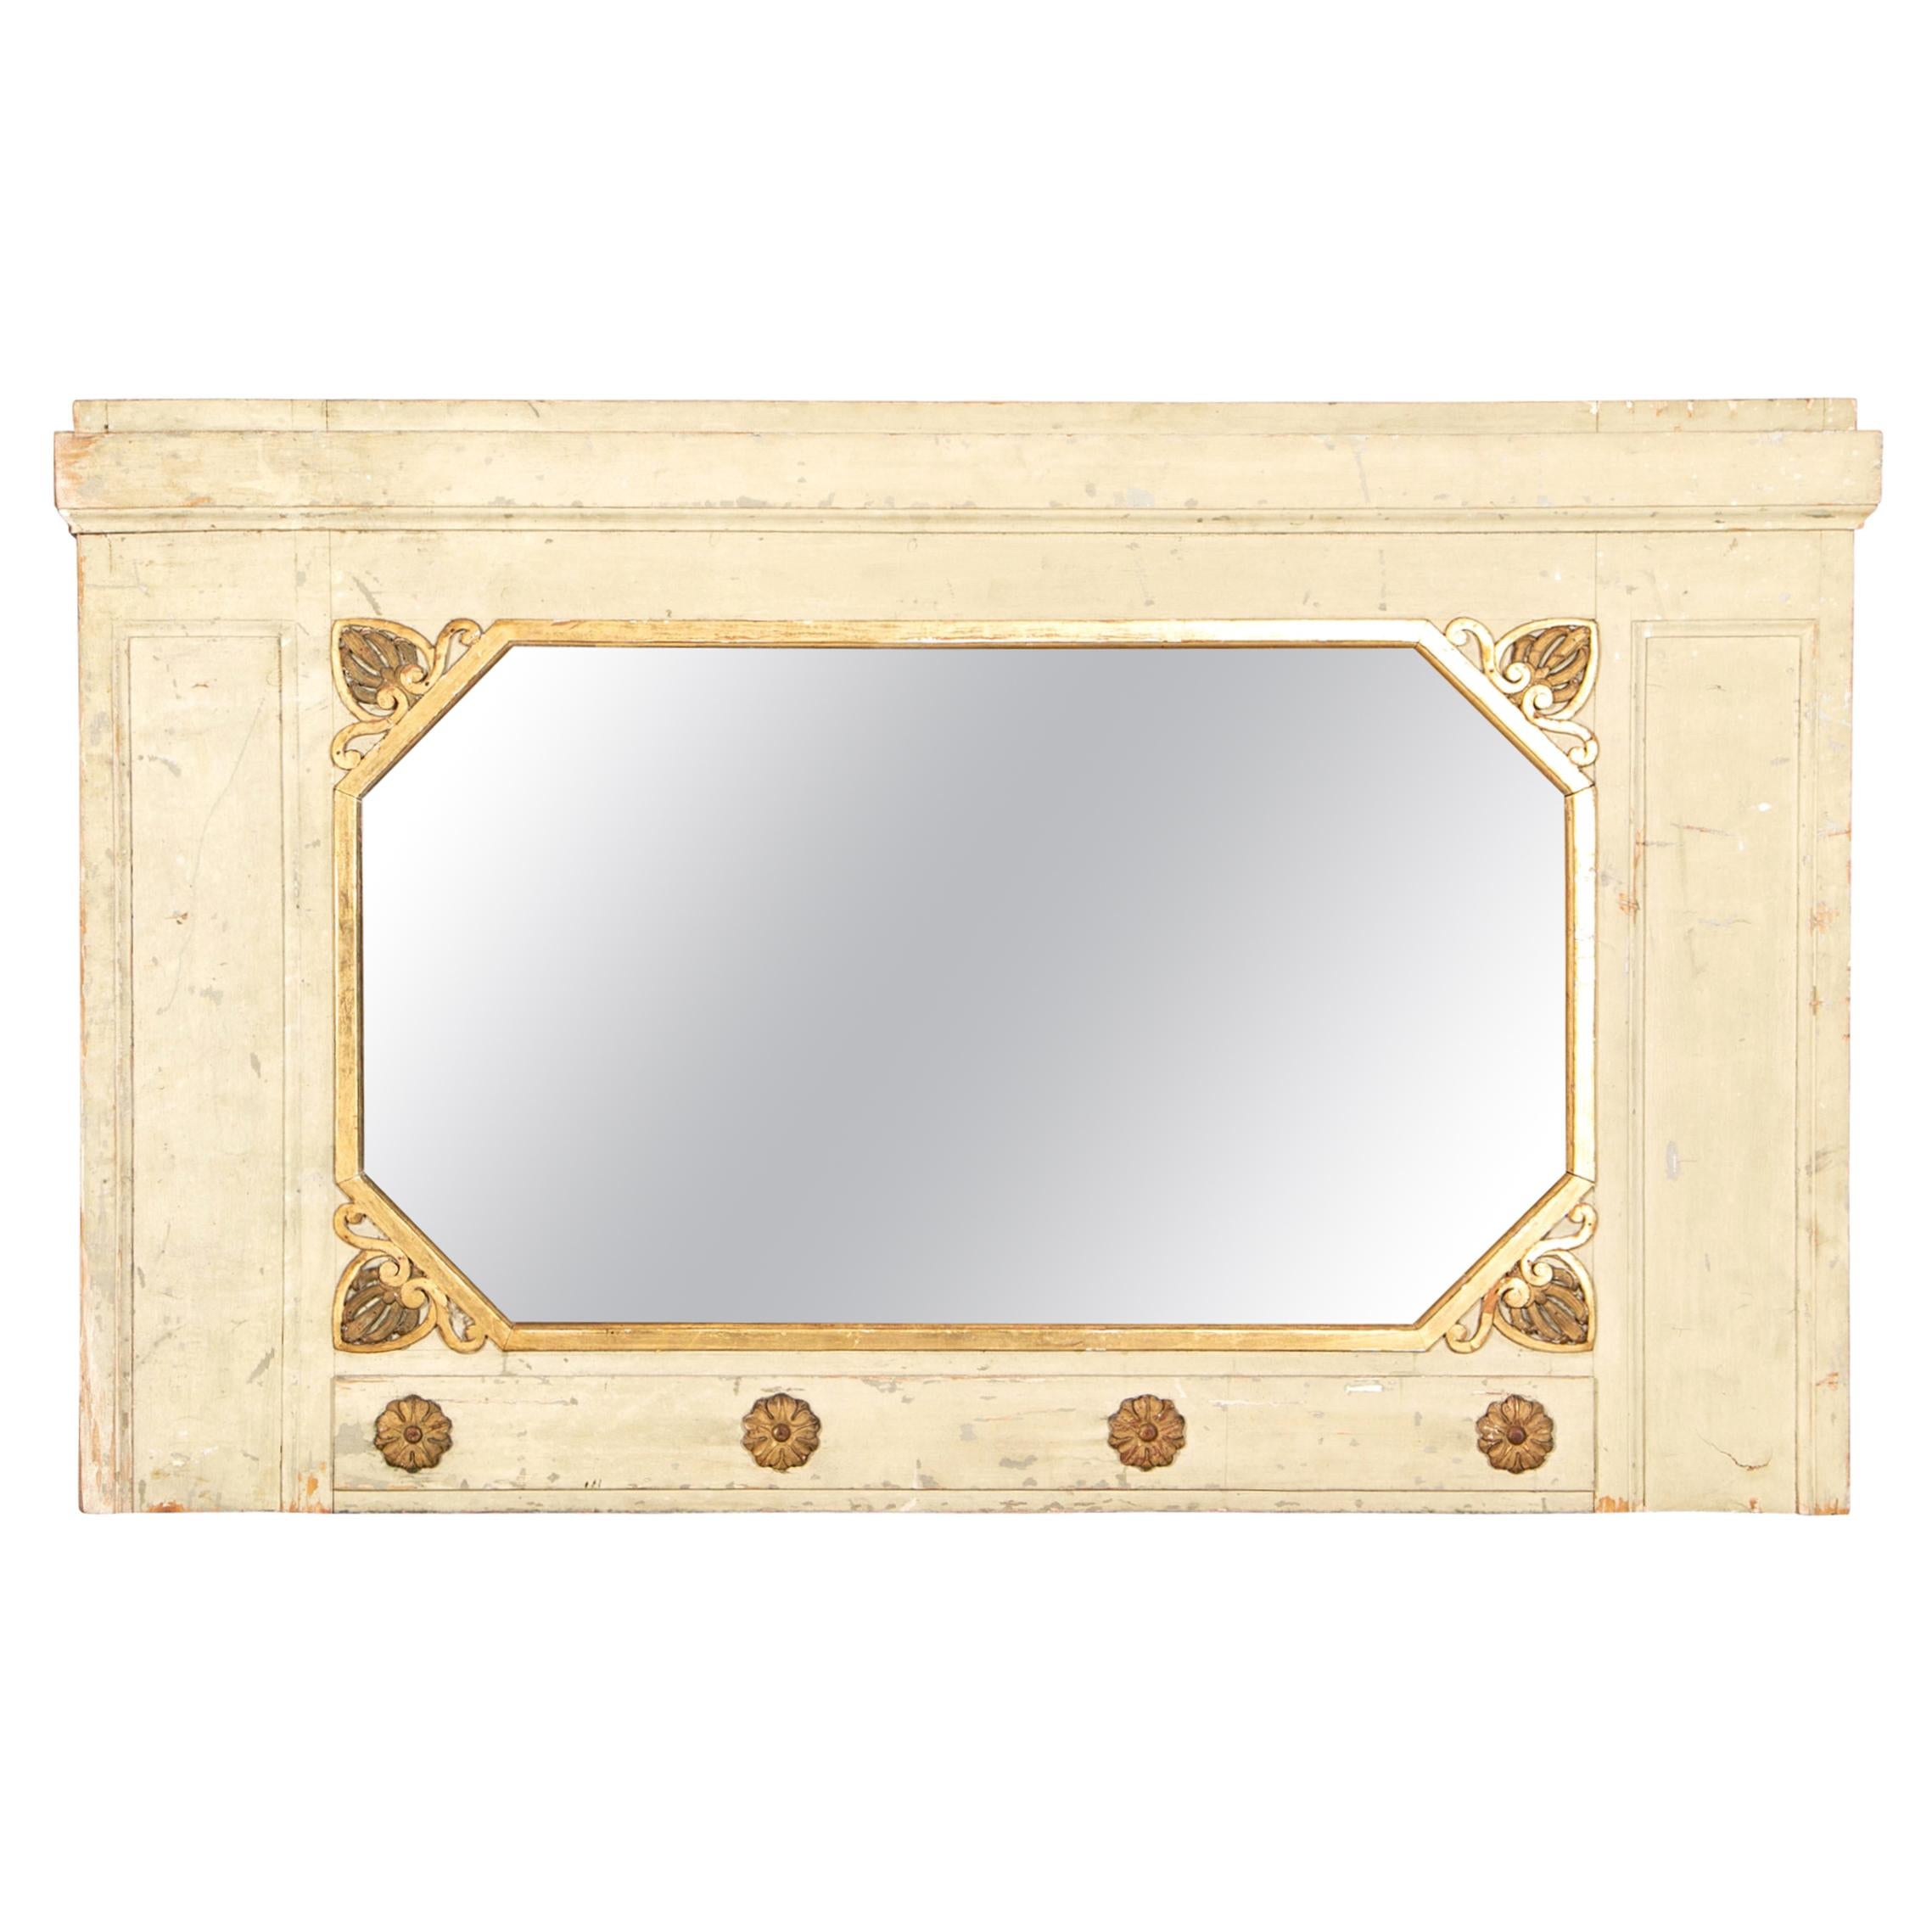 Neoclassical Style Painted and Gilt Decorated Mirror For Sale